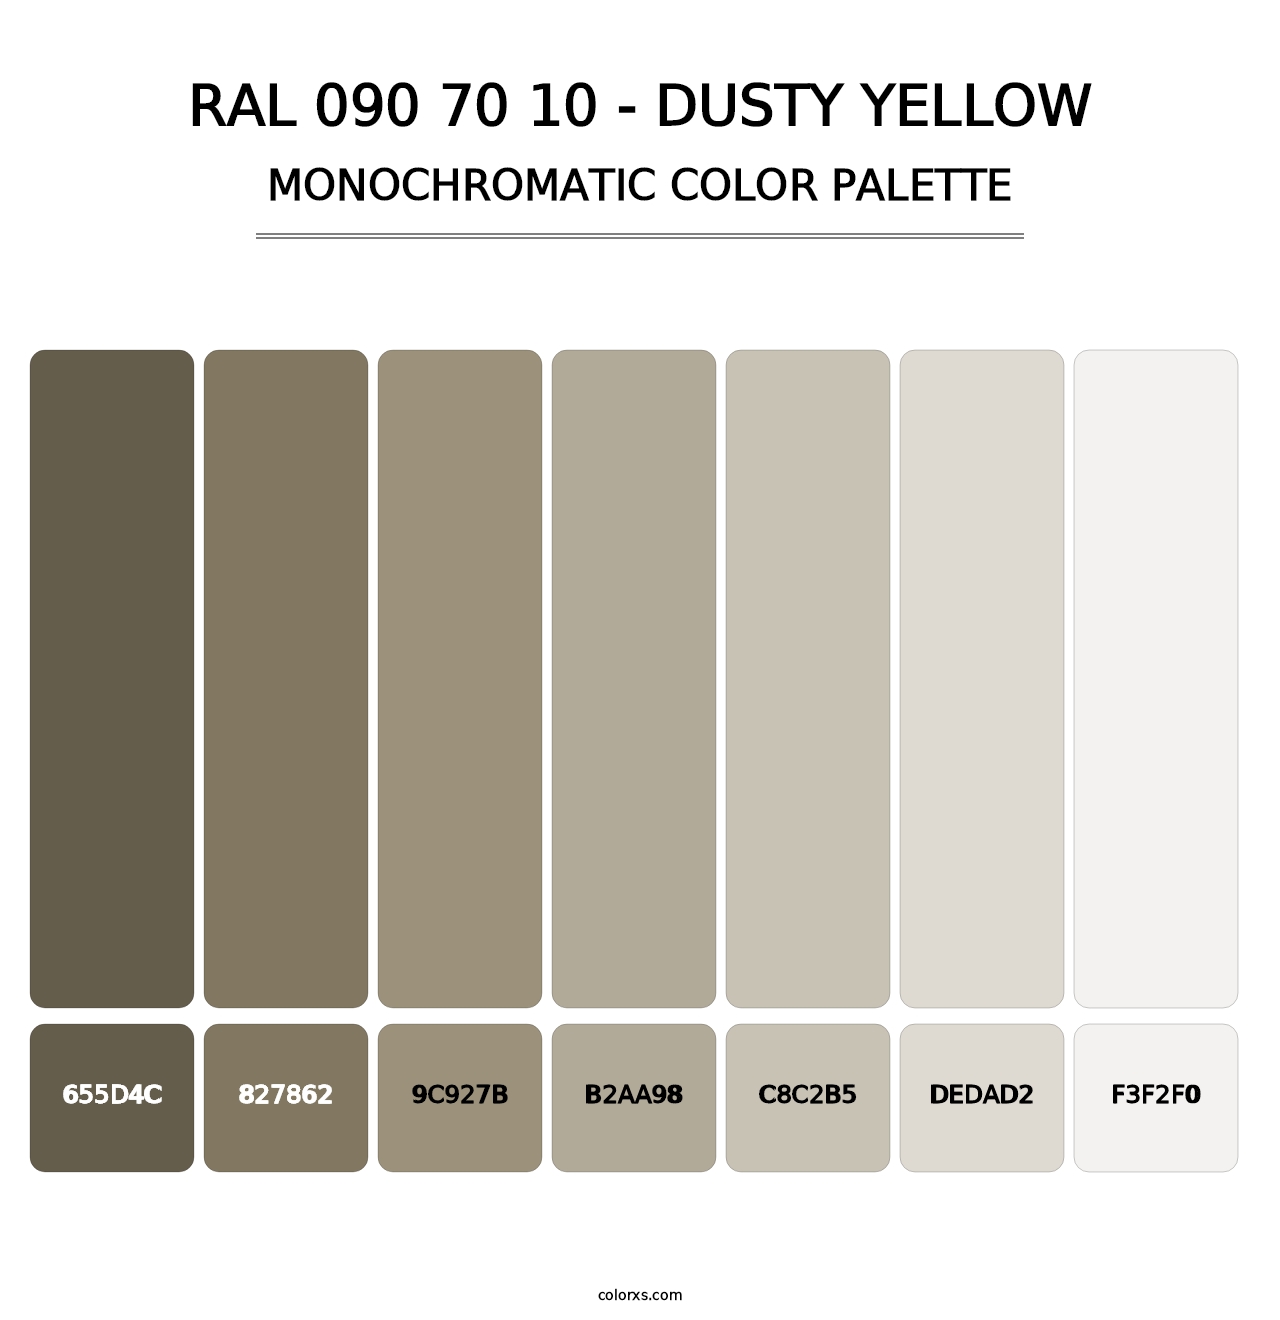 RAL 090 70 10 - Dusty Yellow - Monochromatic Color Palette